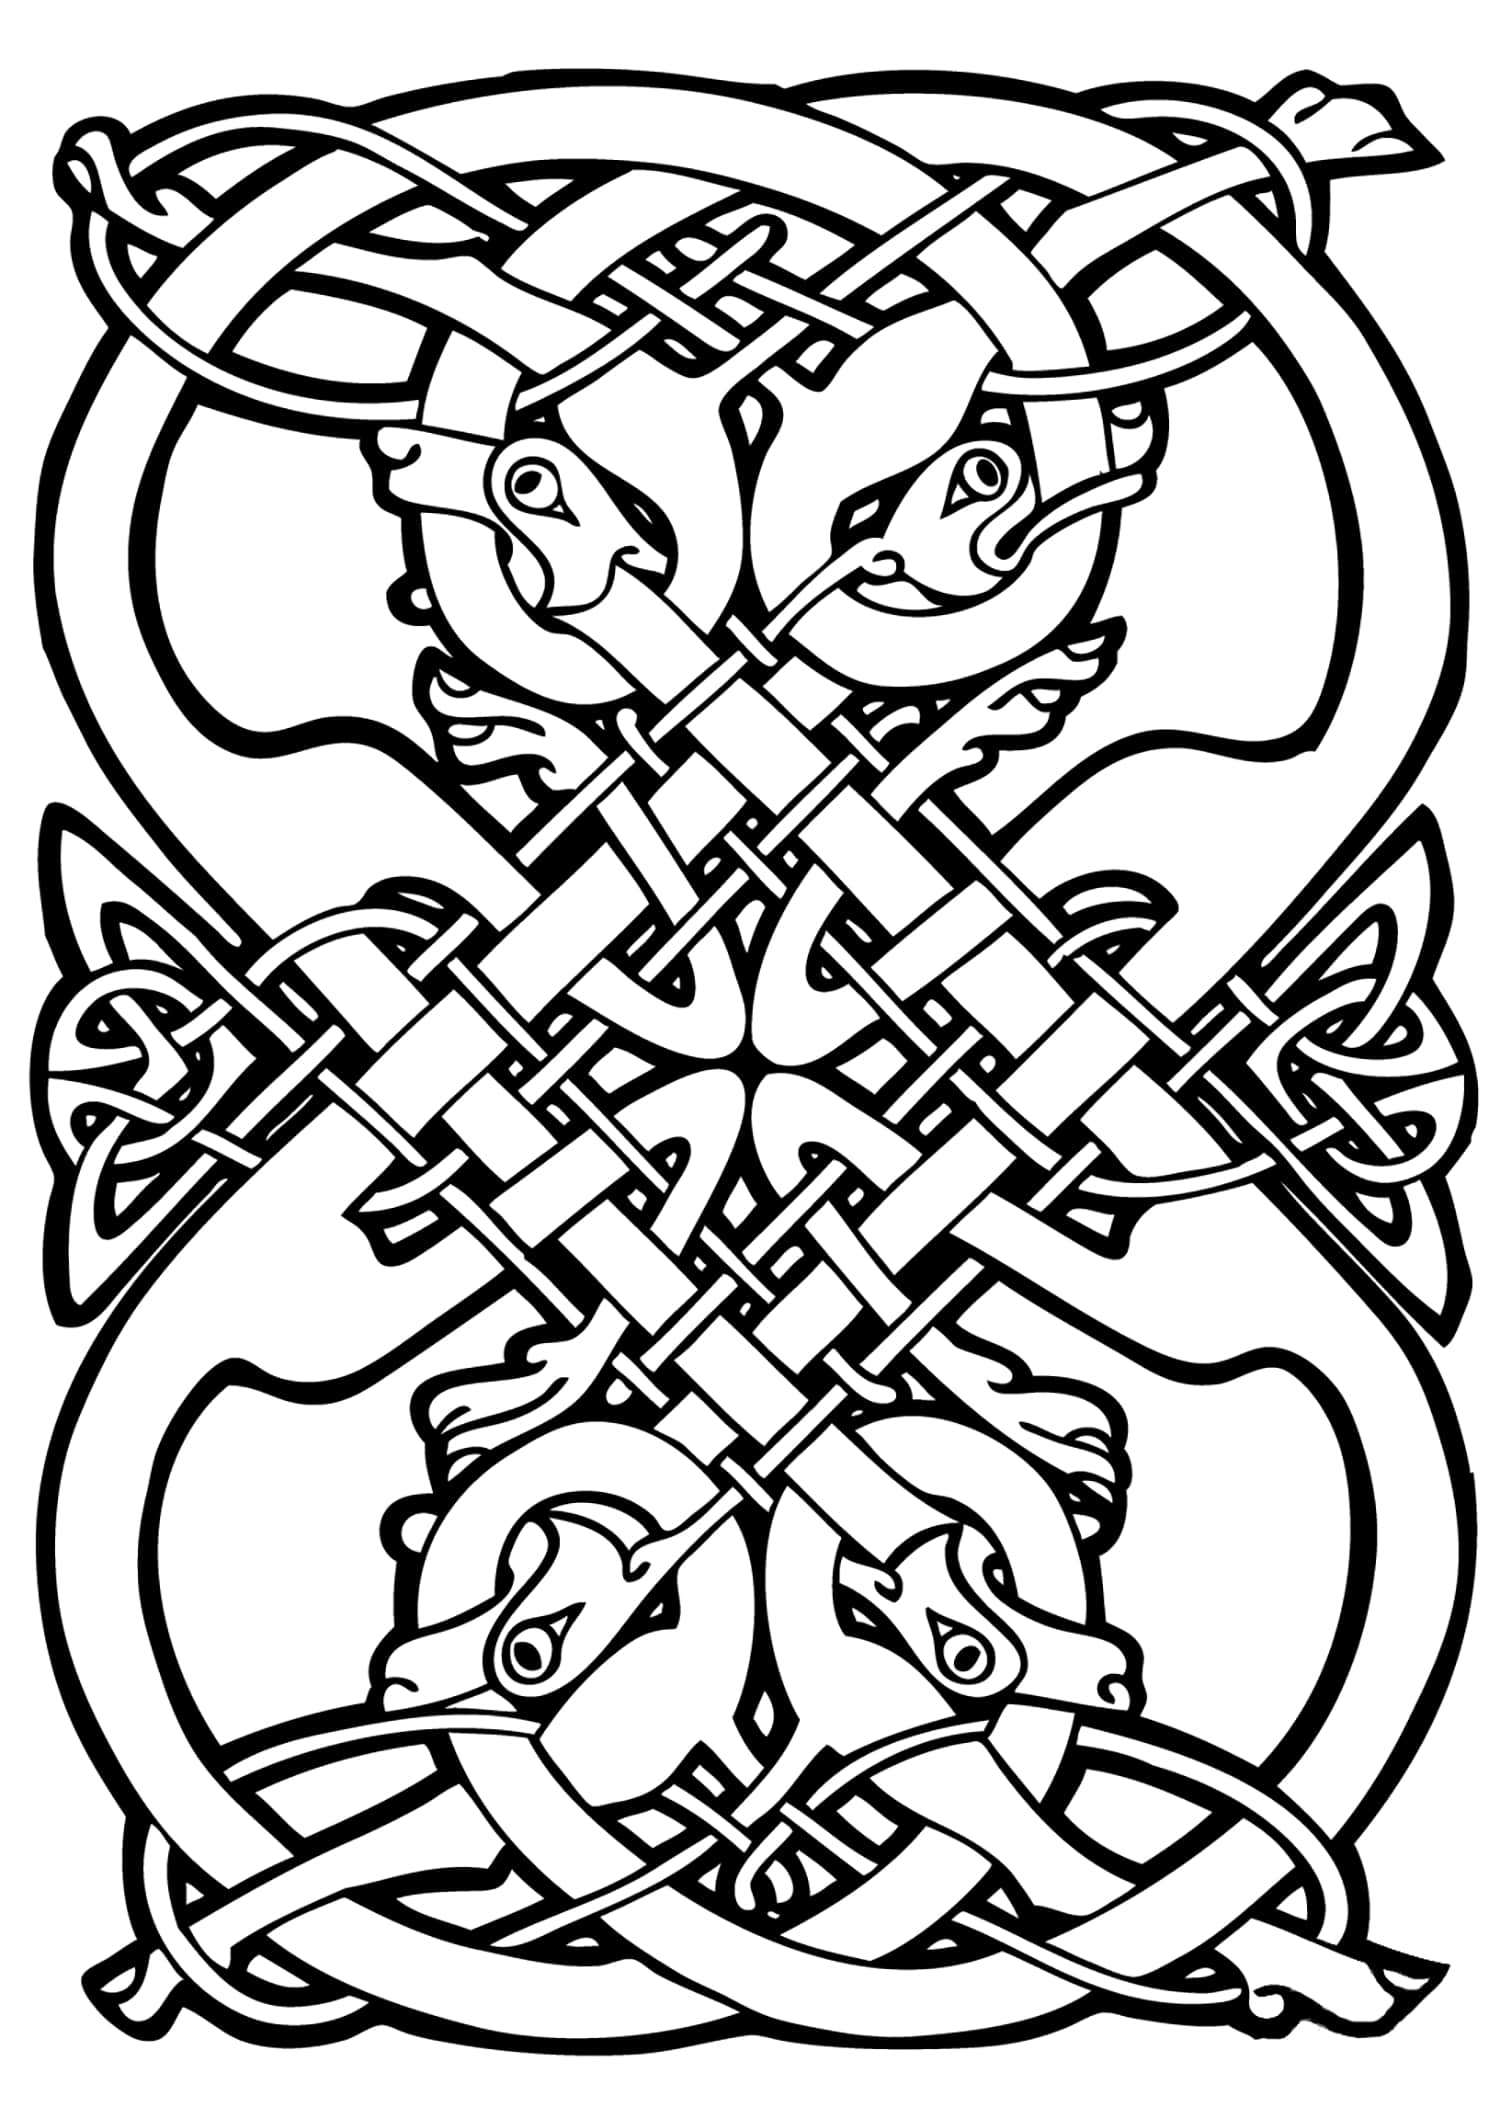 Celtic art design, with intricate patterns and animal heads